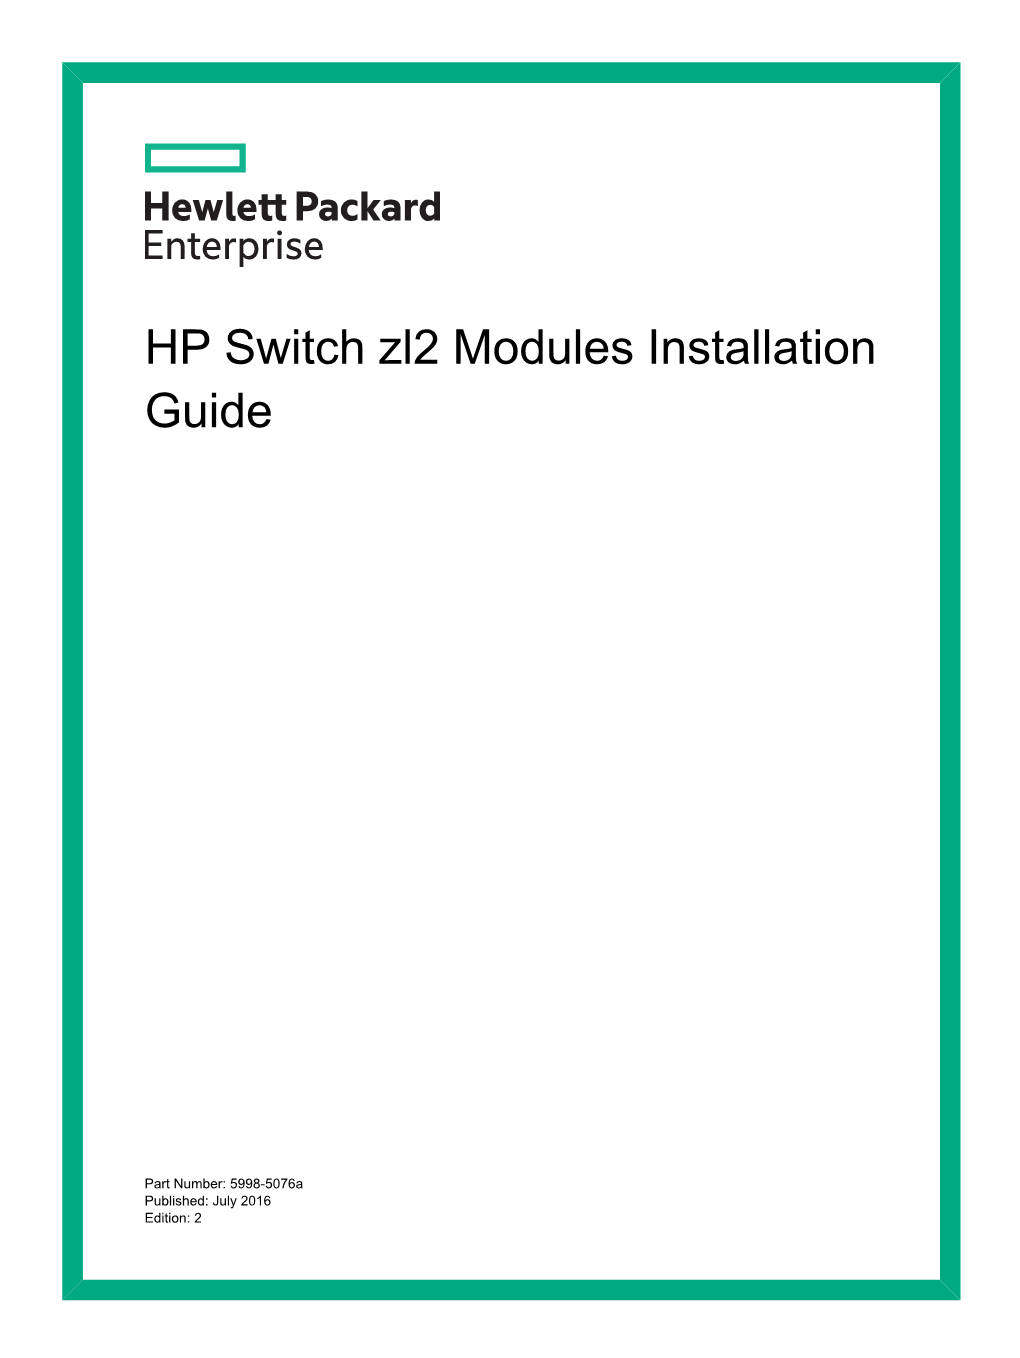 HP Switch Zl2 Modules Installation Guide